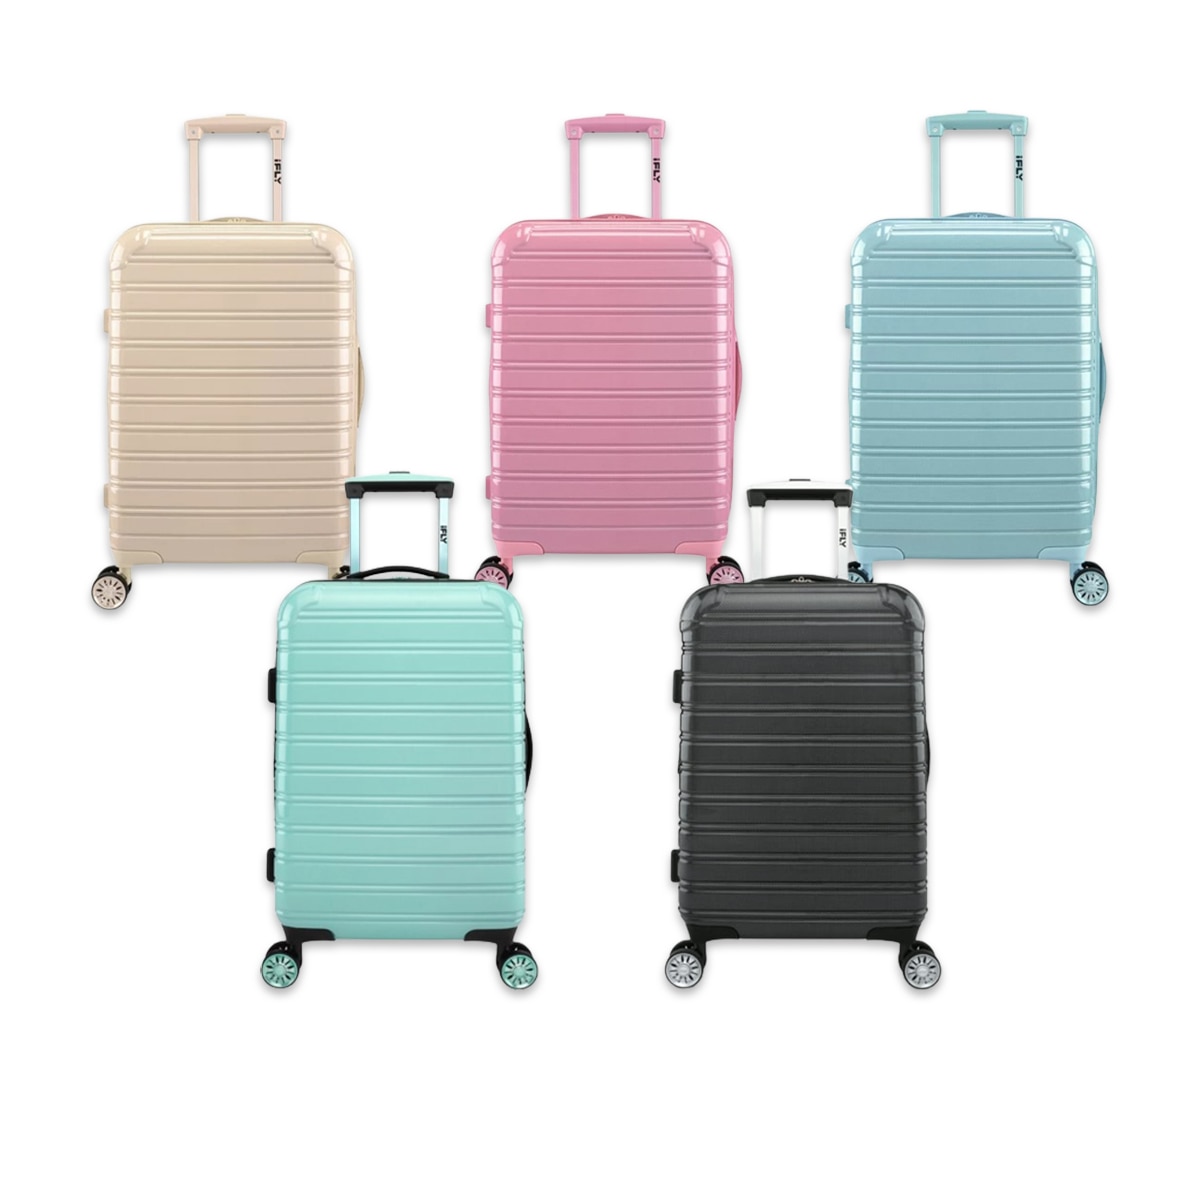 This $89 Walmart Suitcase Has 14,900+ 5-Star Reviews